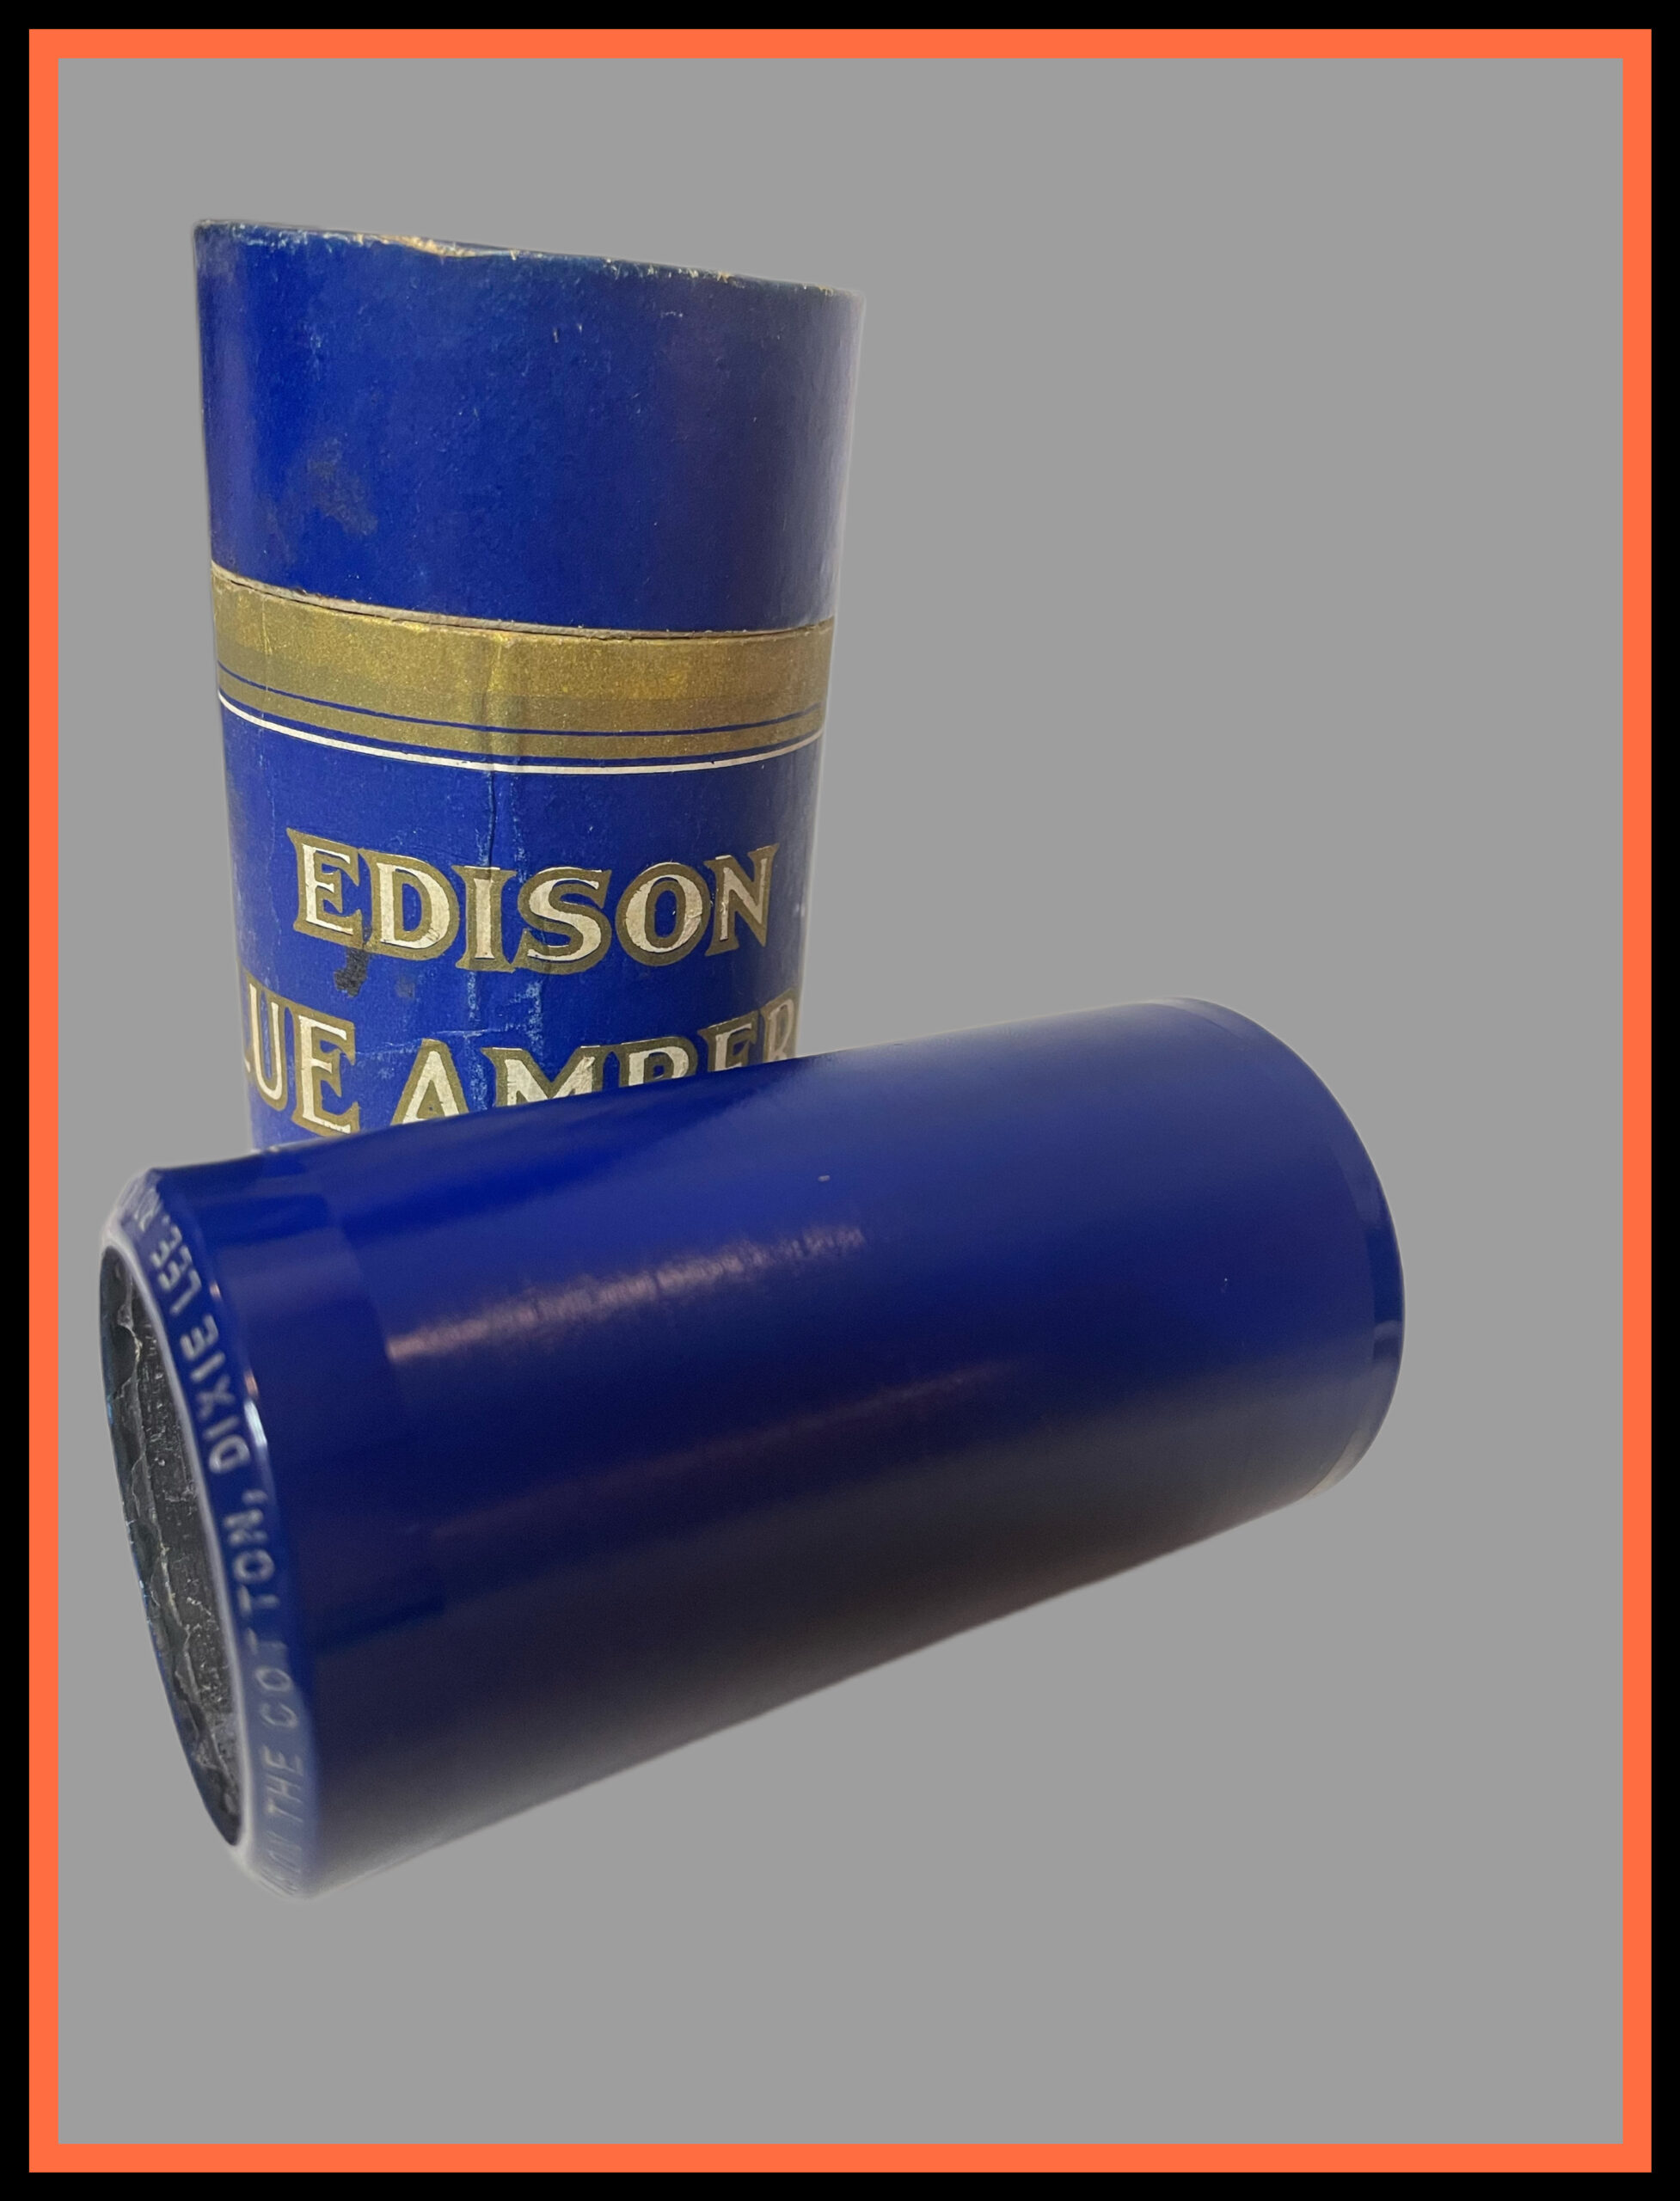 Edison 4 minute Cylinder…”Don’t Bite the Hand That’s Feeding You”… Patroitic Song!